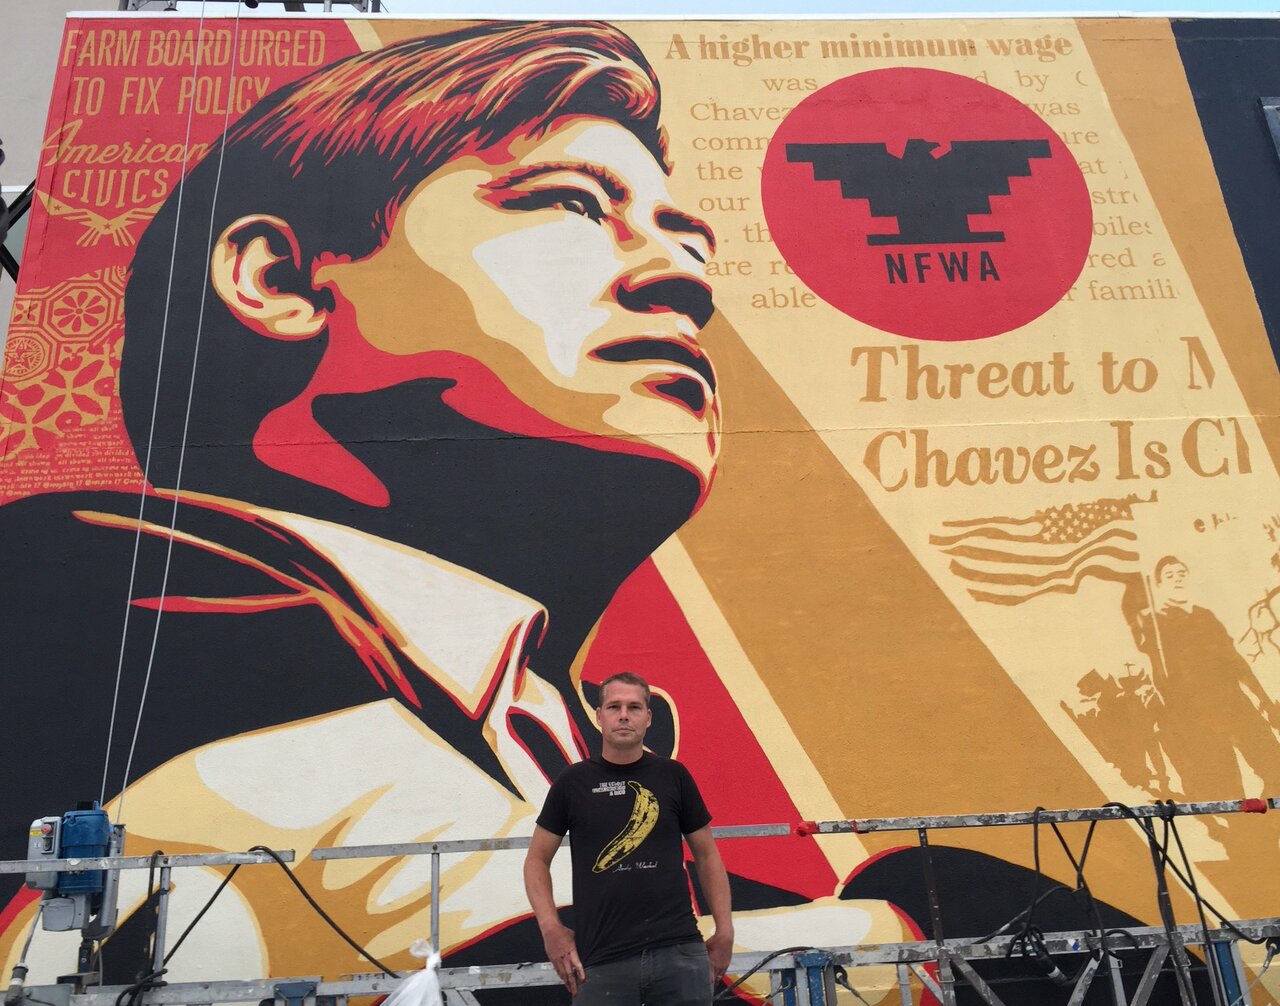 Workers' Rights #mural complete!  On to the next! @UFWF  #CesarChavez #SanFrancisco #AmericanCivics #ObeyGiant https://t.co/MHXKusbhLp